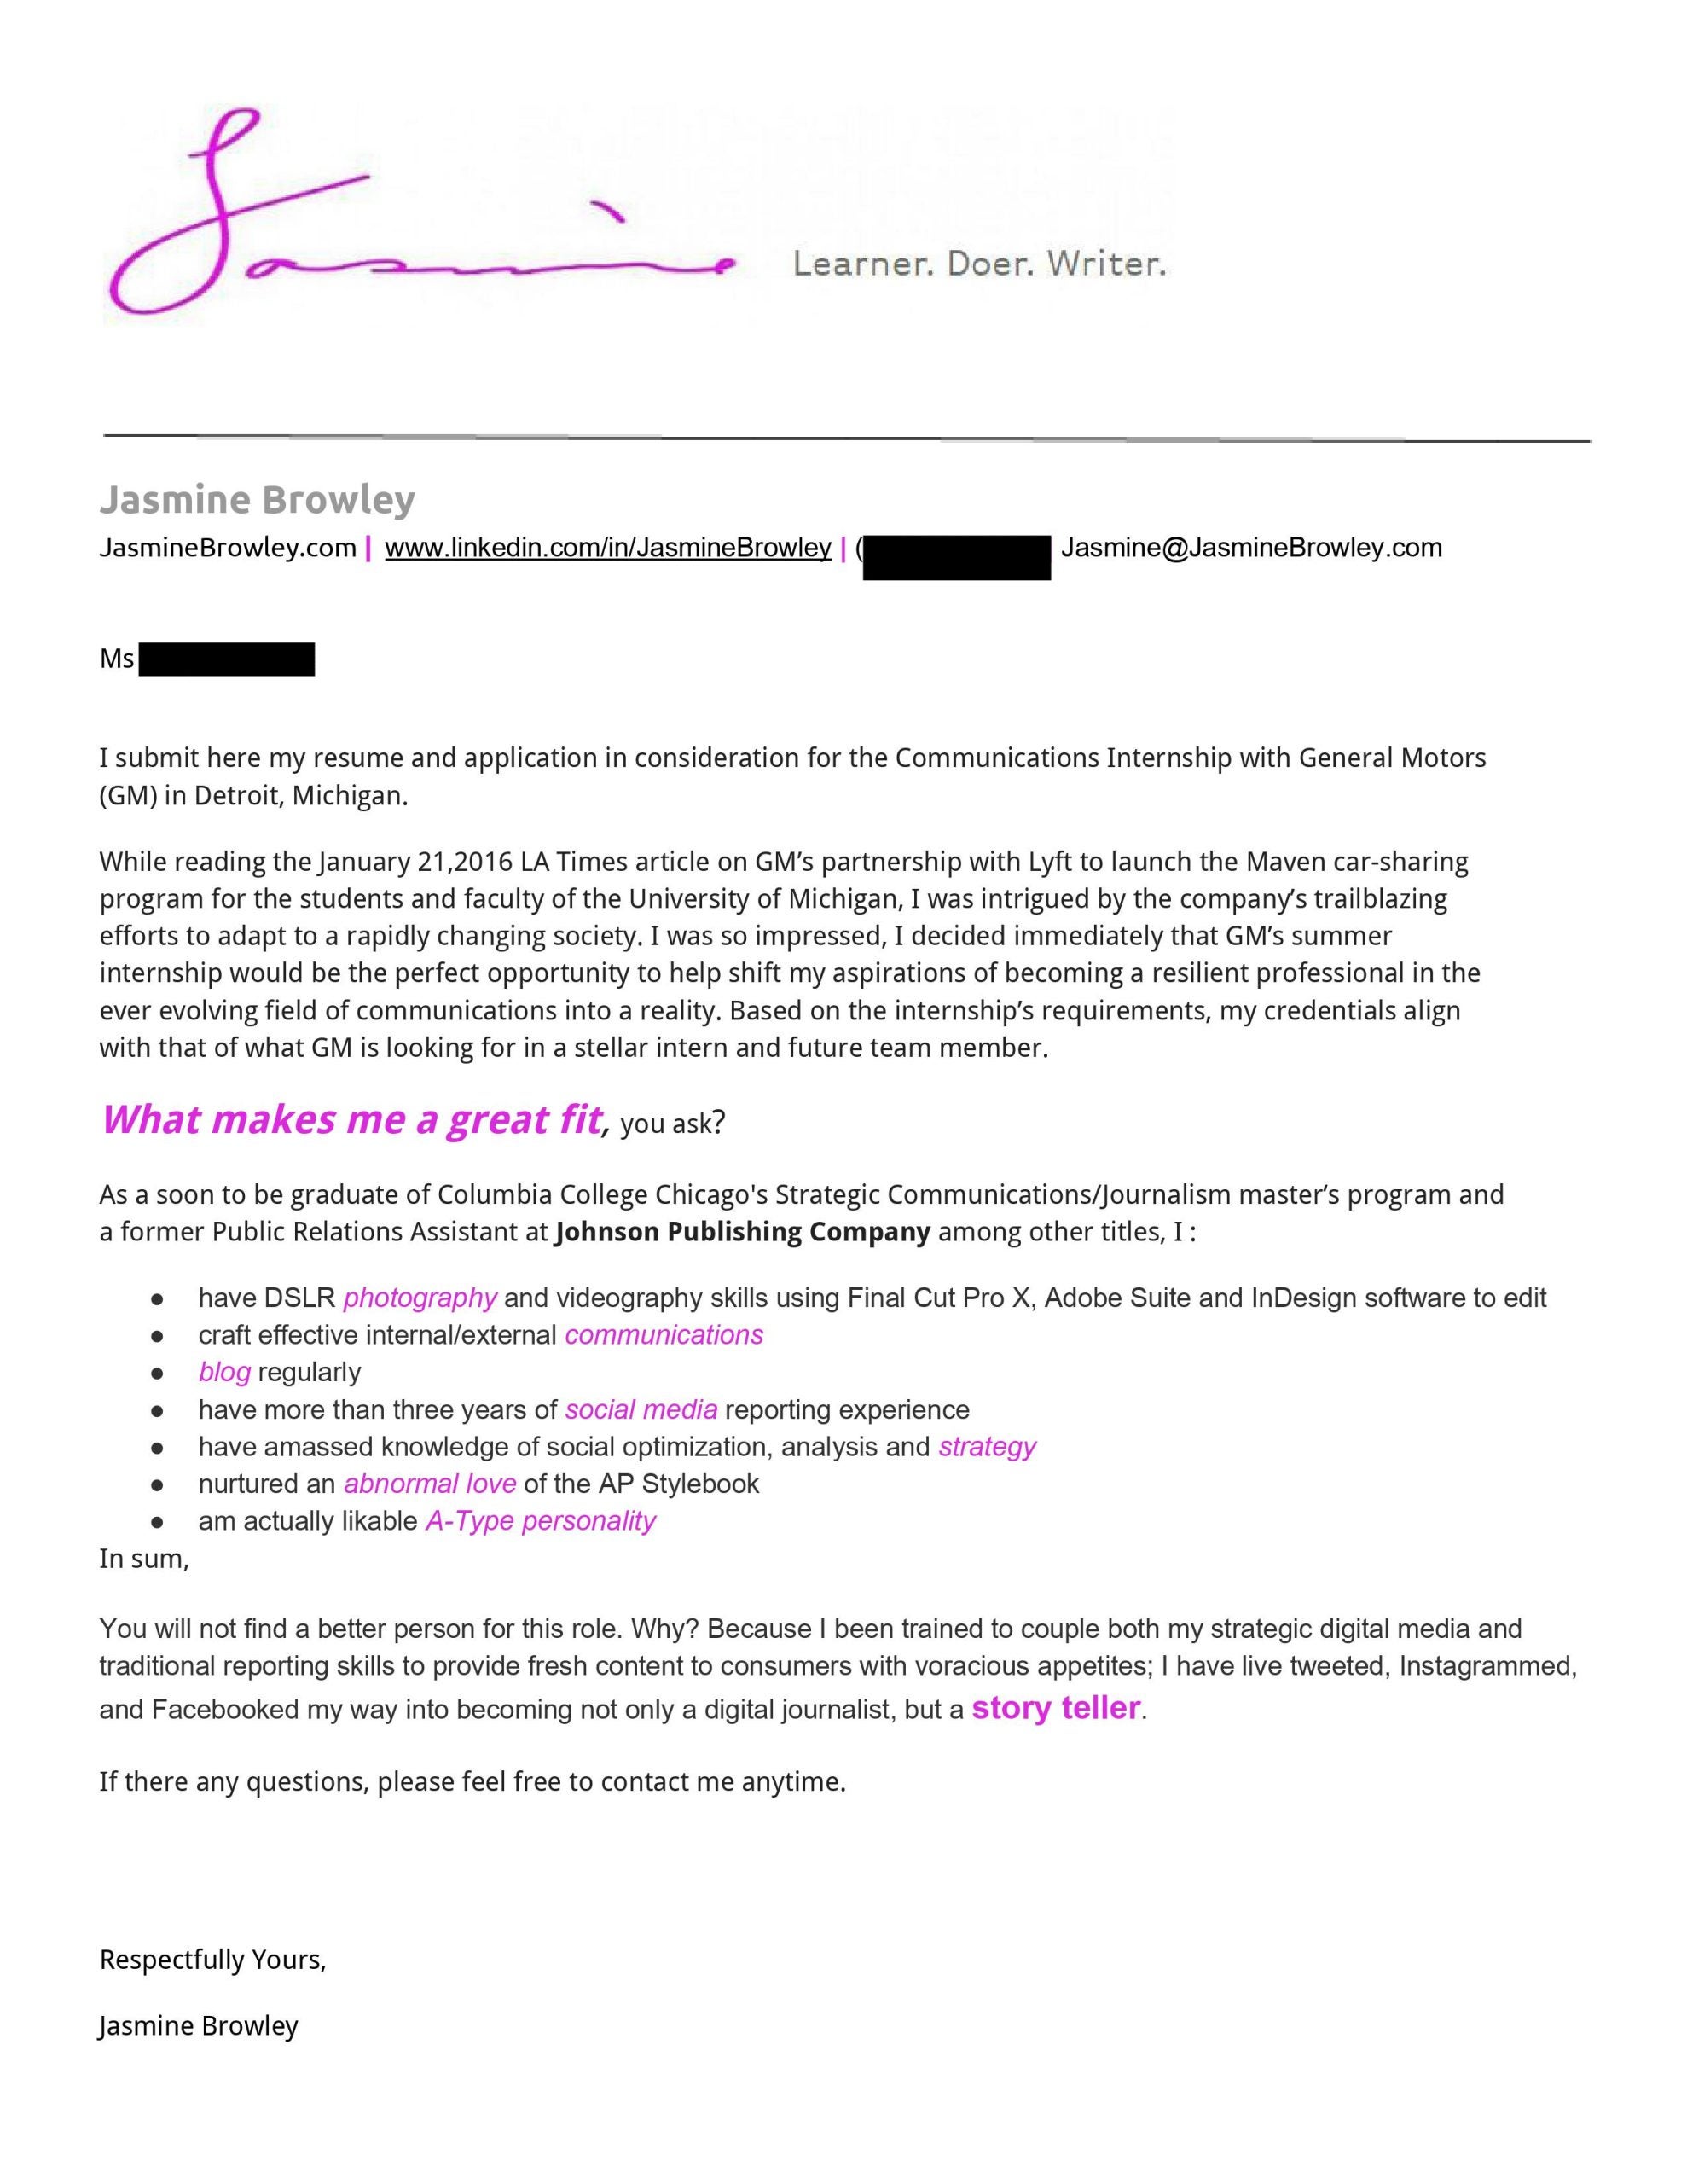 Ungatekeeping: Here’s My Cover Letter That Landed Me The Job